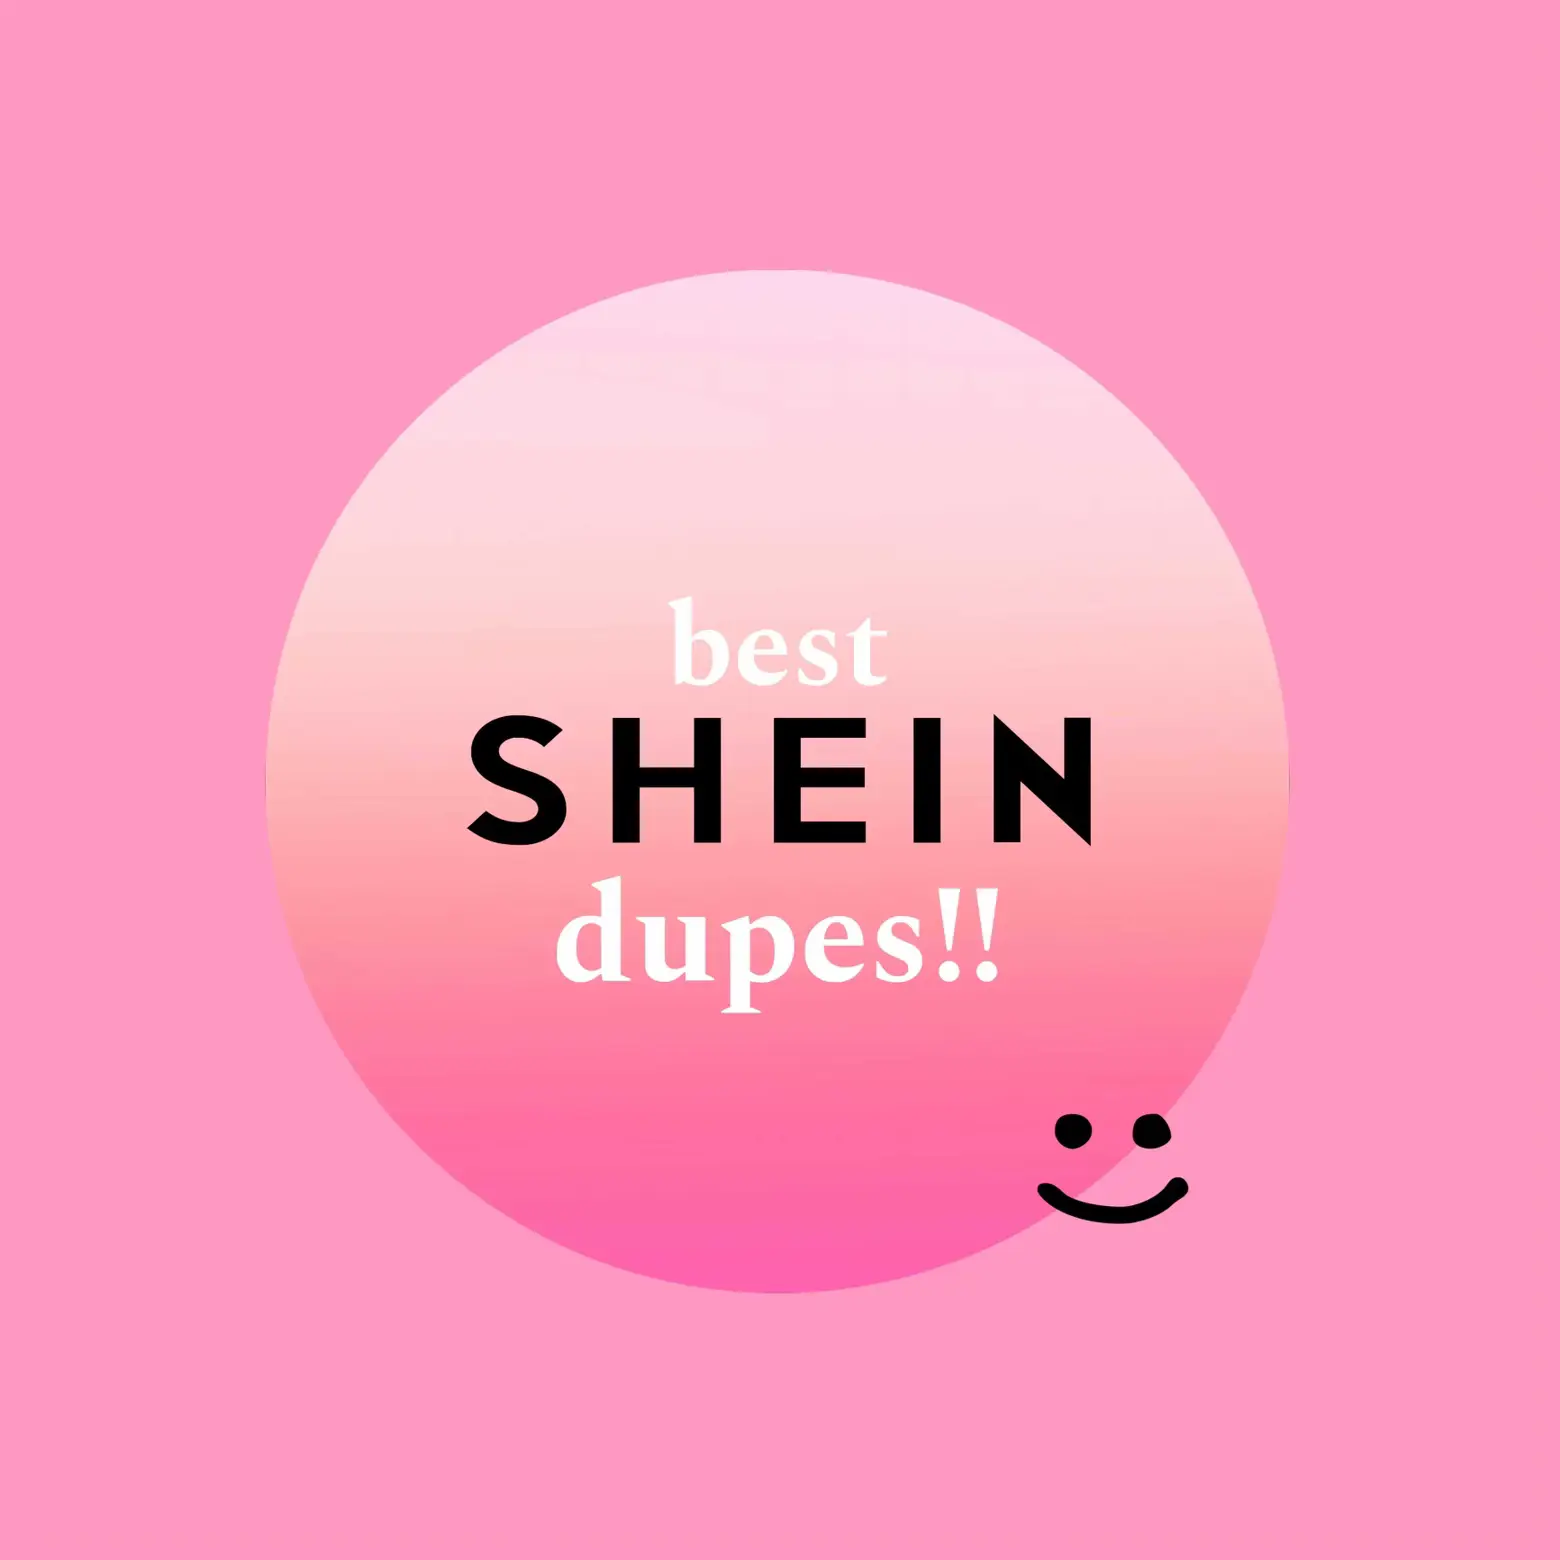 These skims dupes from SHEIN are GIVING what its supposed to, at a